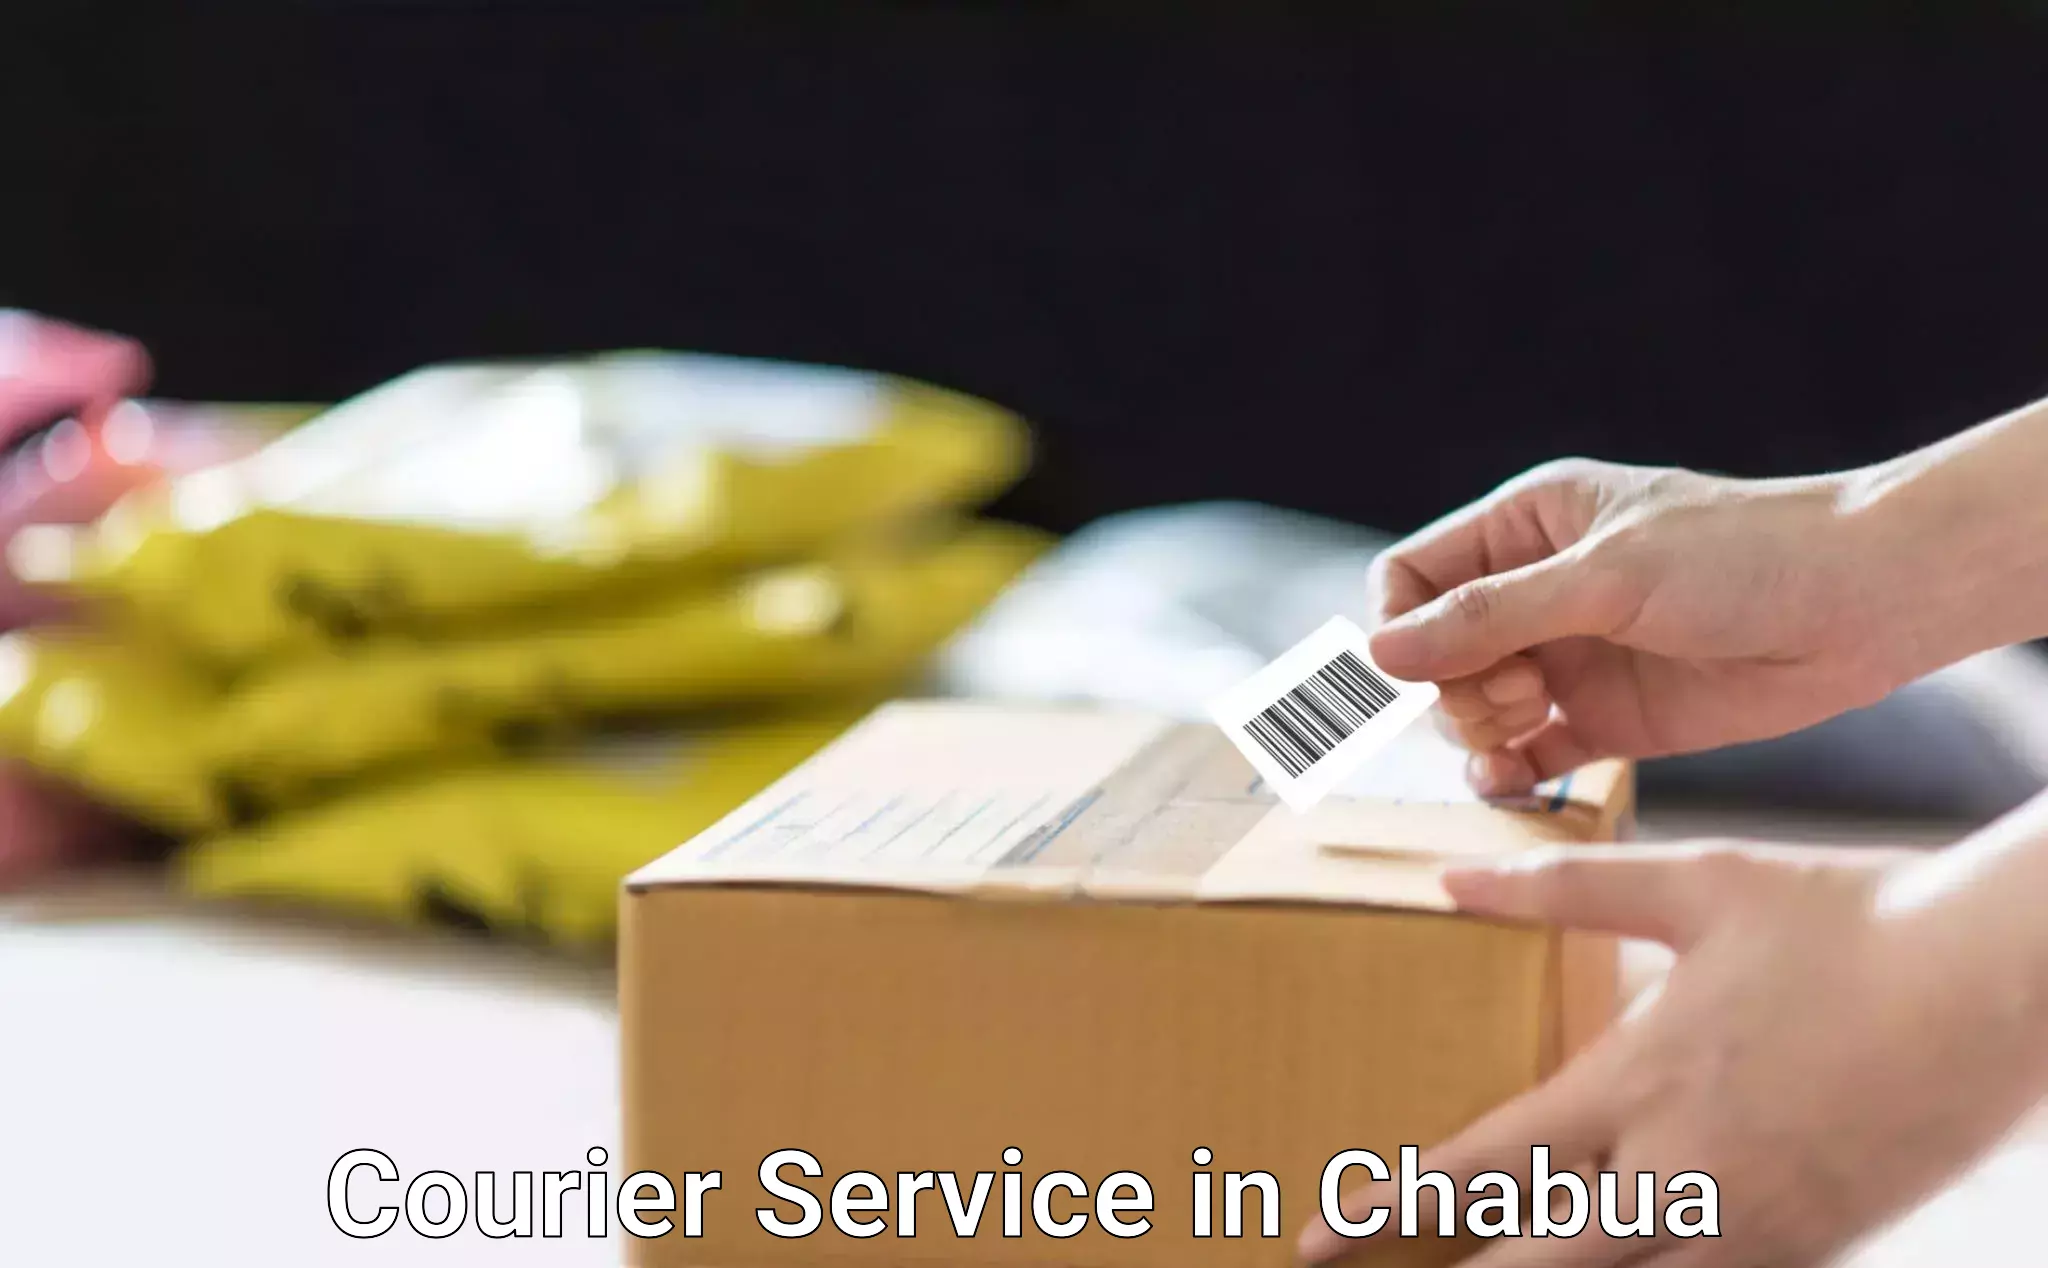 Online package tracking in Chabua